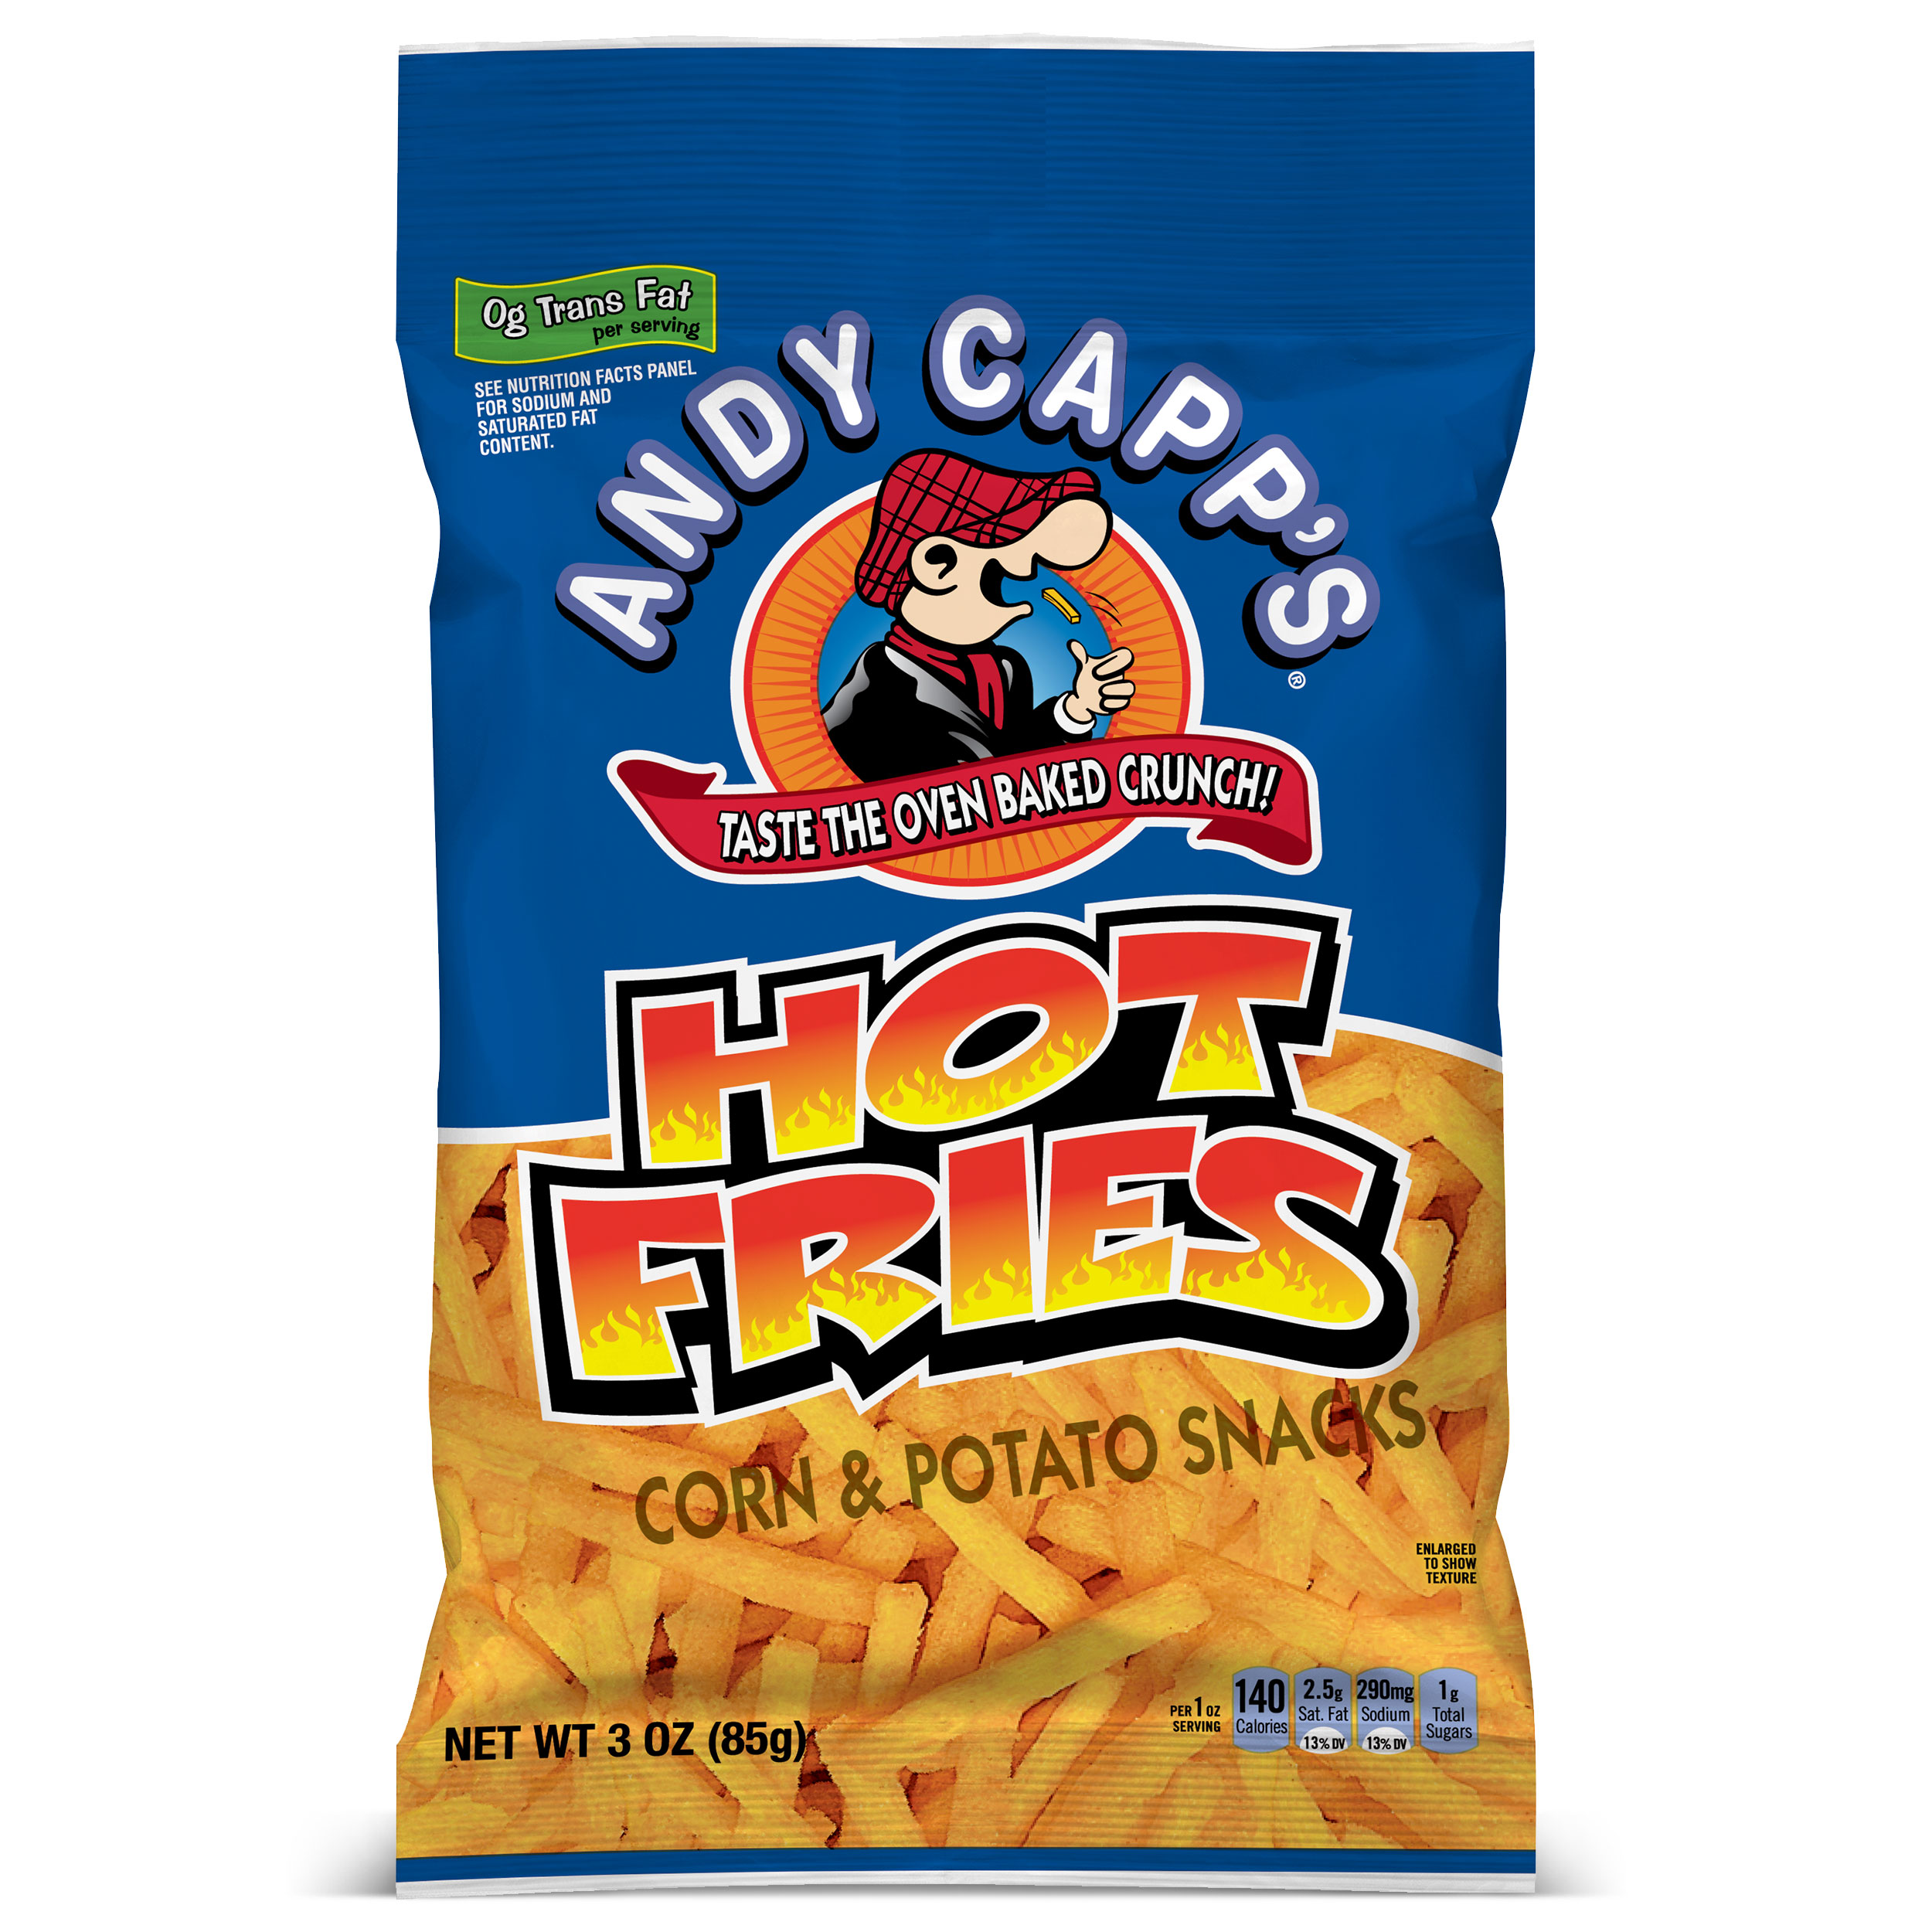 Pictures of andy capp